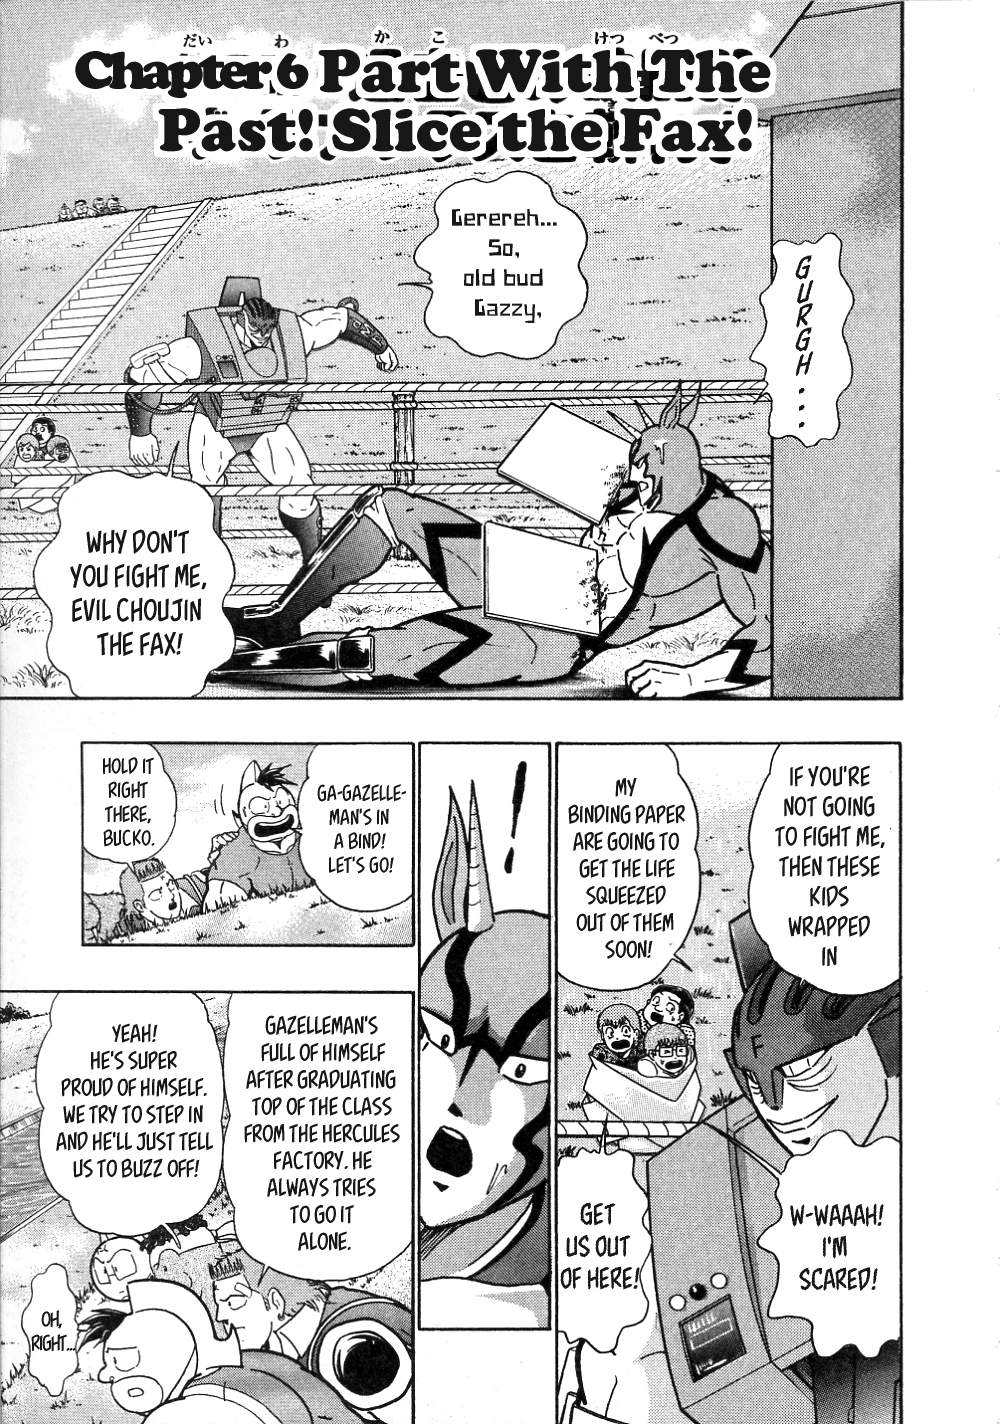 Kinnikuman Nisei ~All Out Chojin Assault~ Vol. 1 Ch. 6 Part With the Past! Slice the Fax!